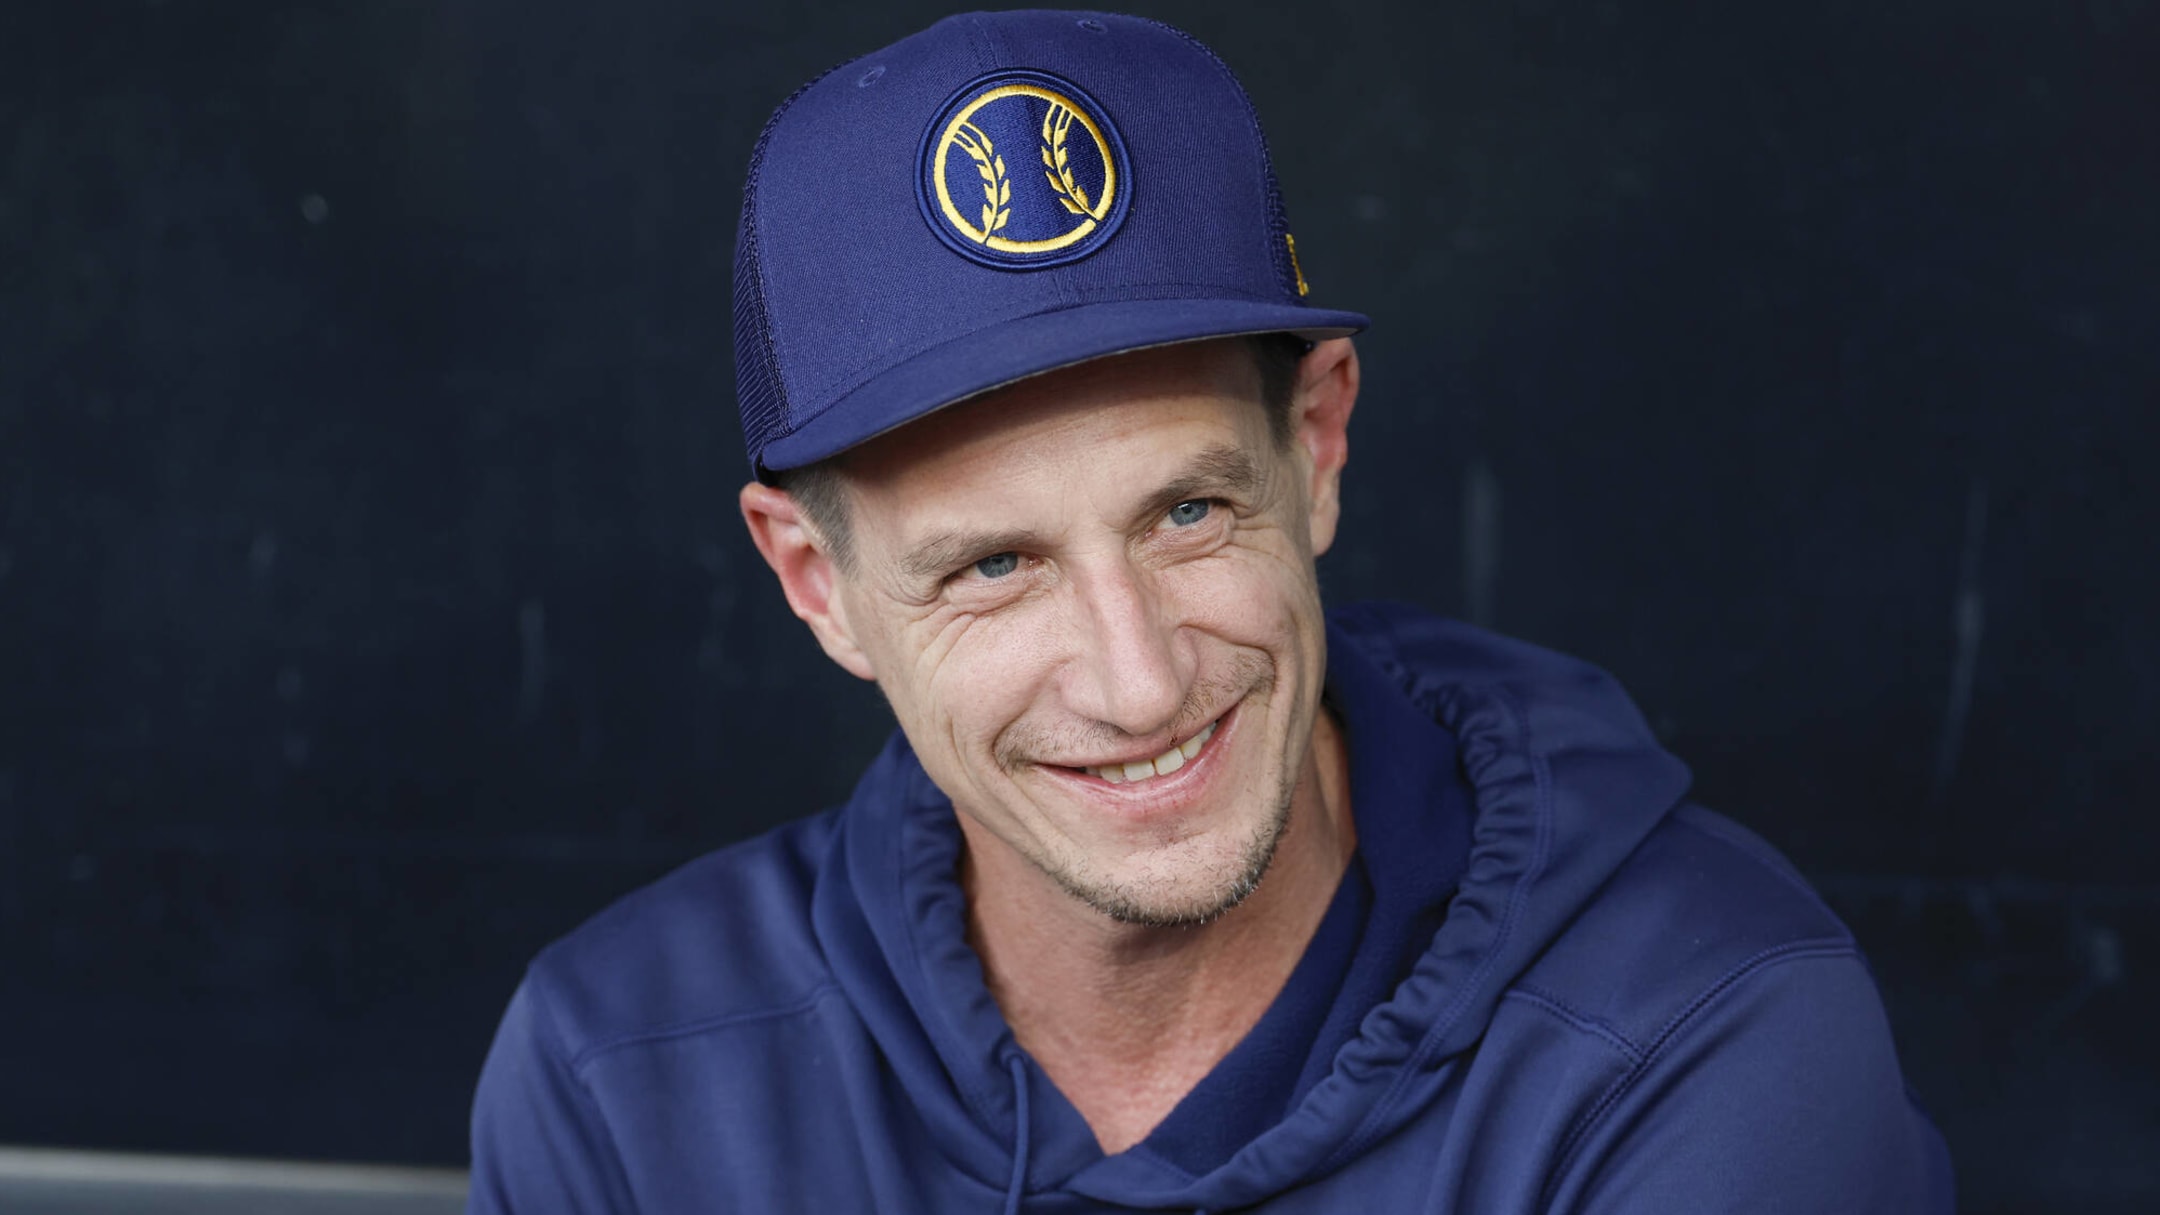 Brewers manager Craig Counsell's contract extended through 2023 season